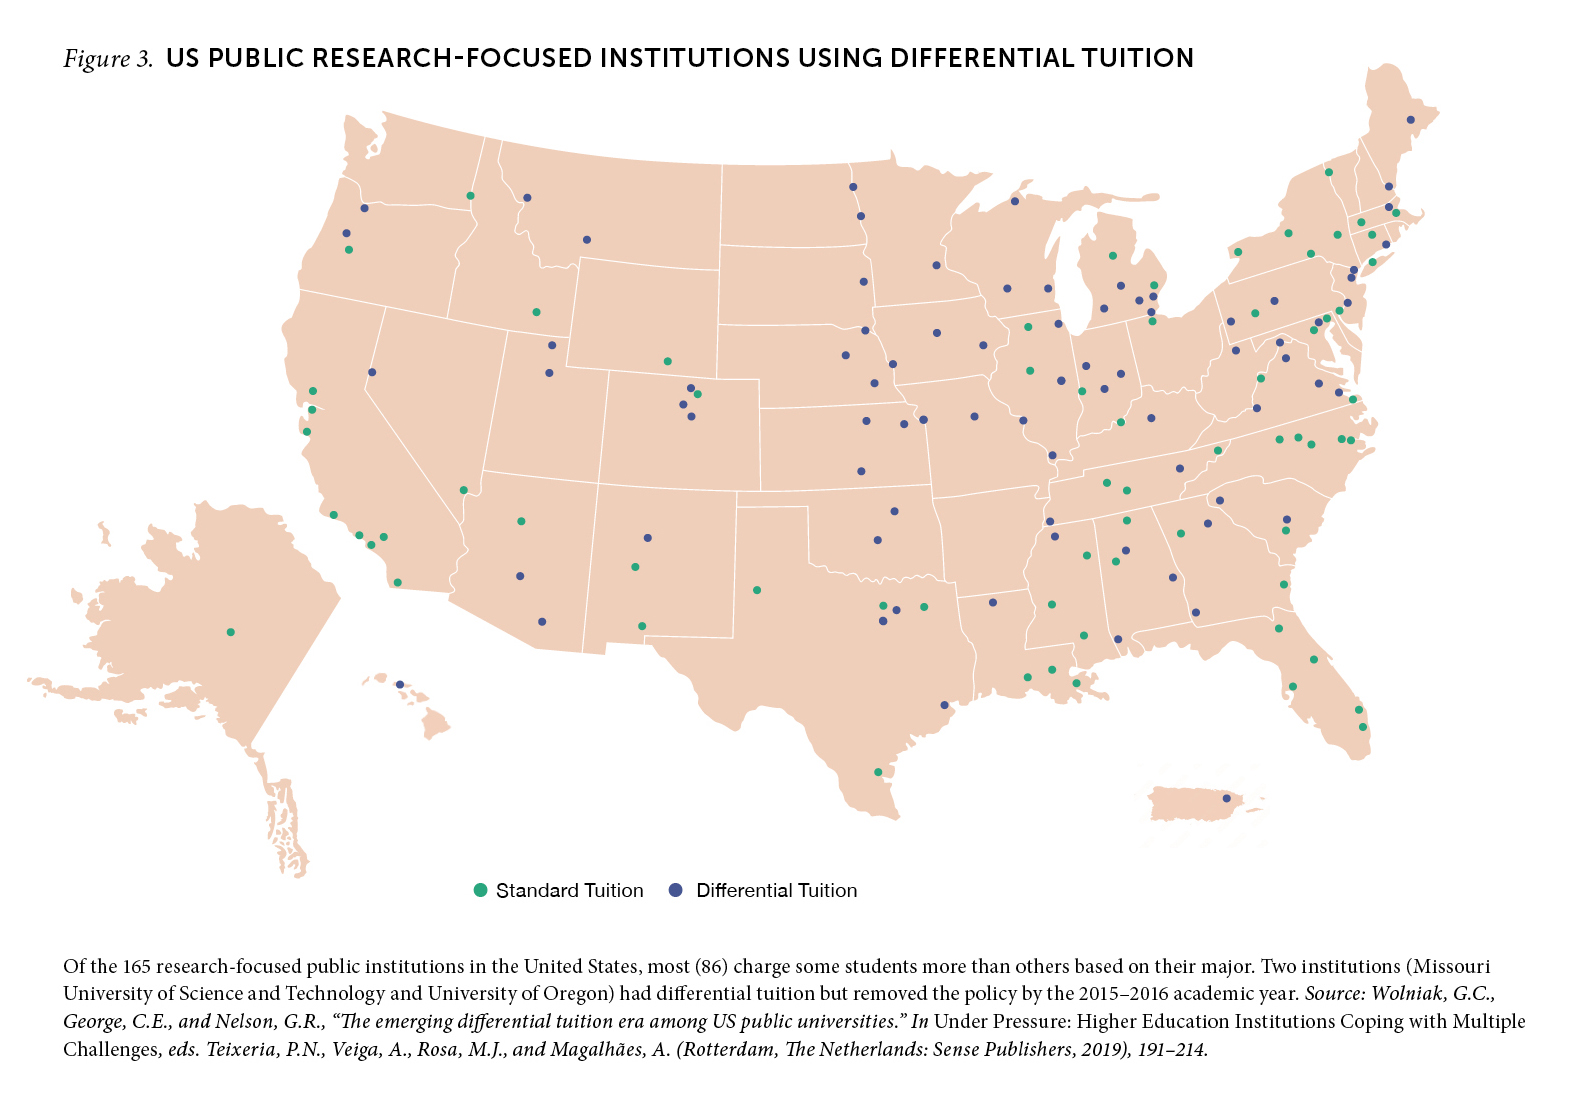 Figure 3. US public research-focused institutions using differential tuition